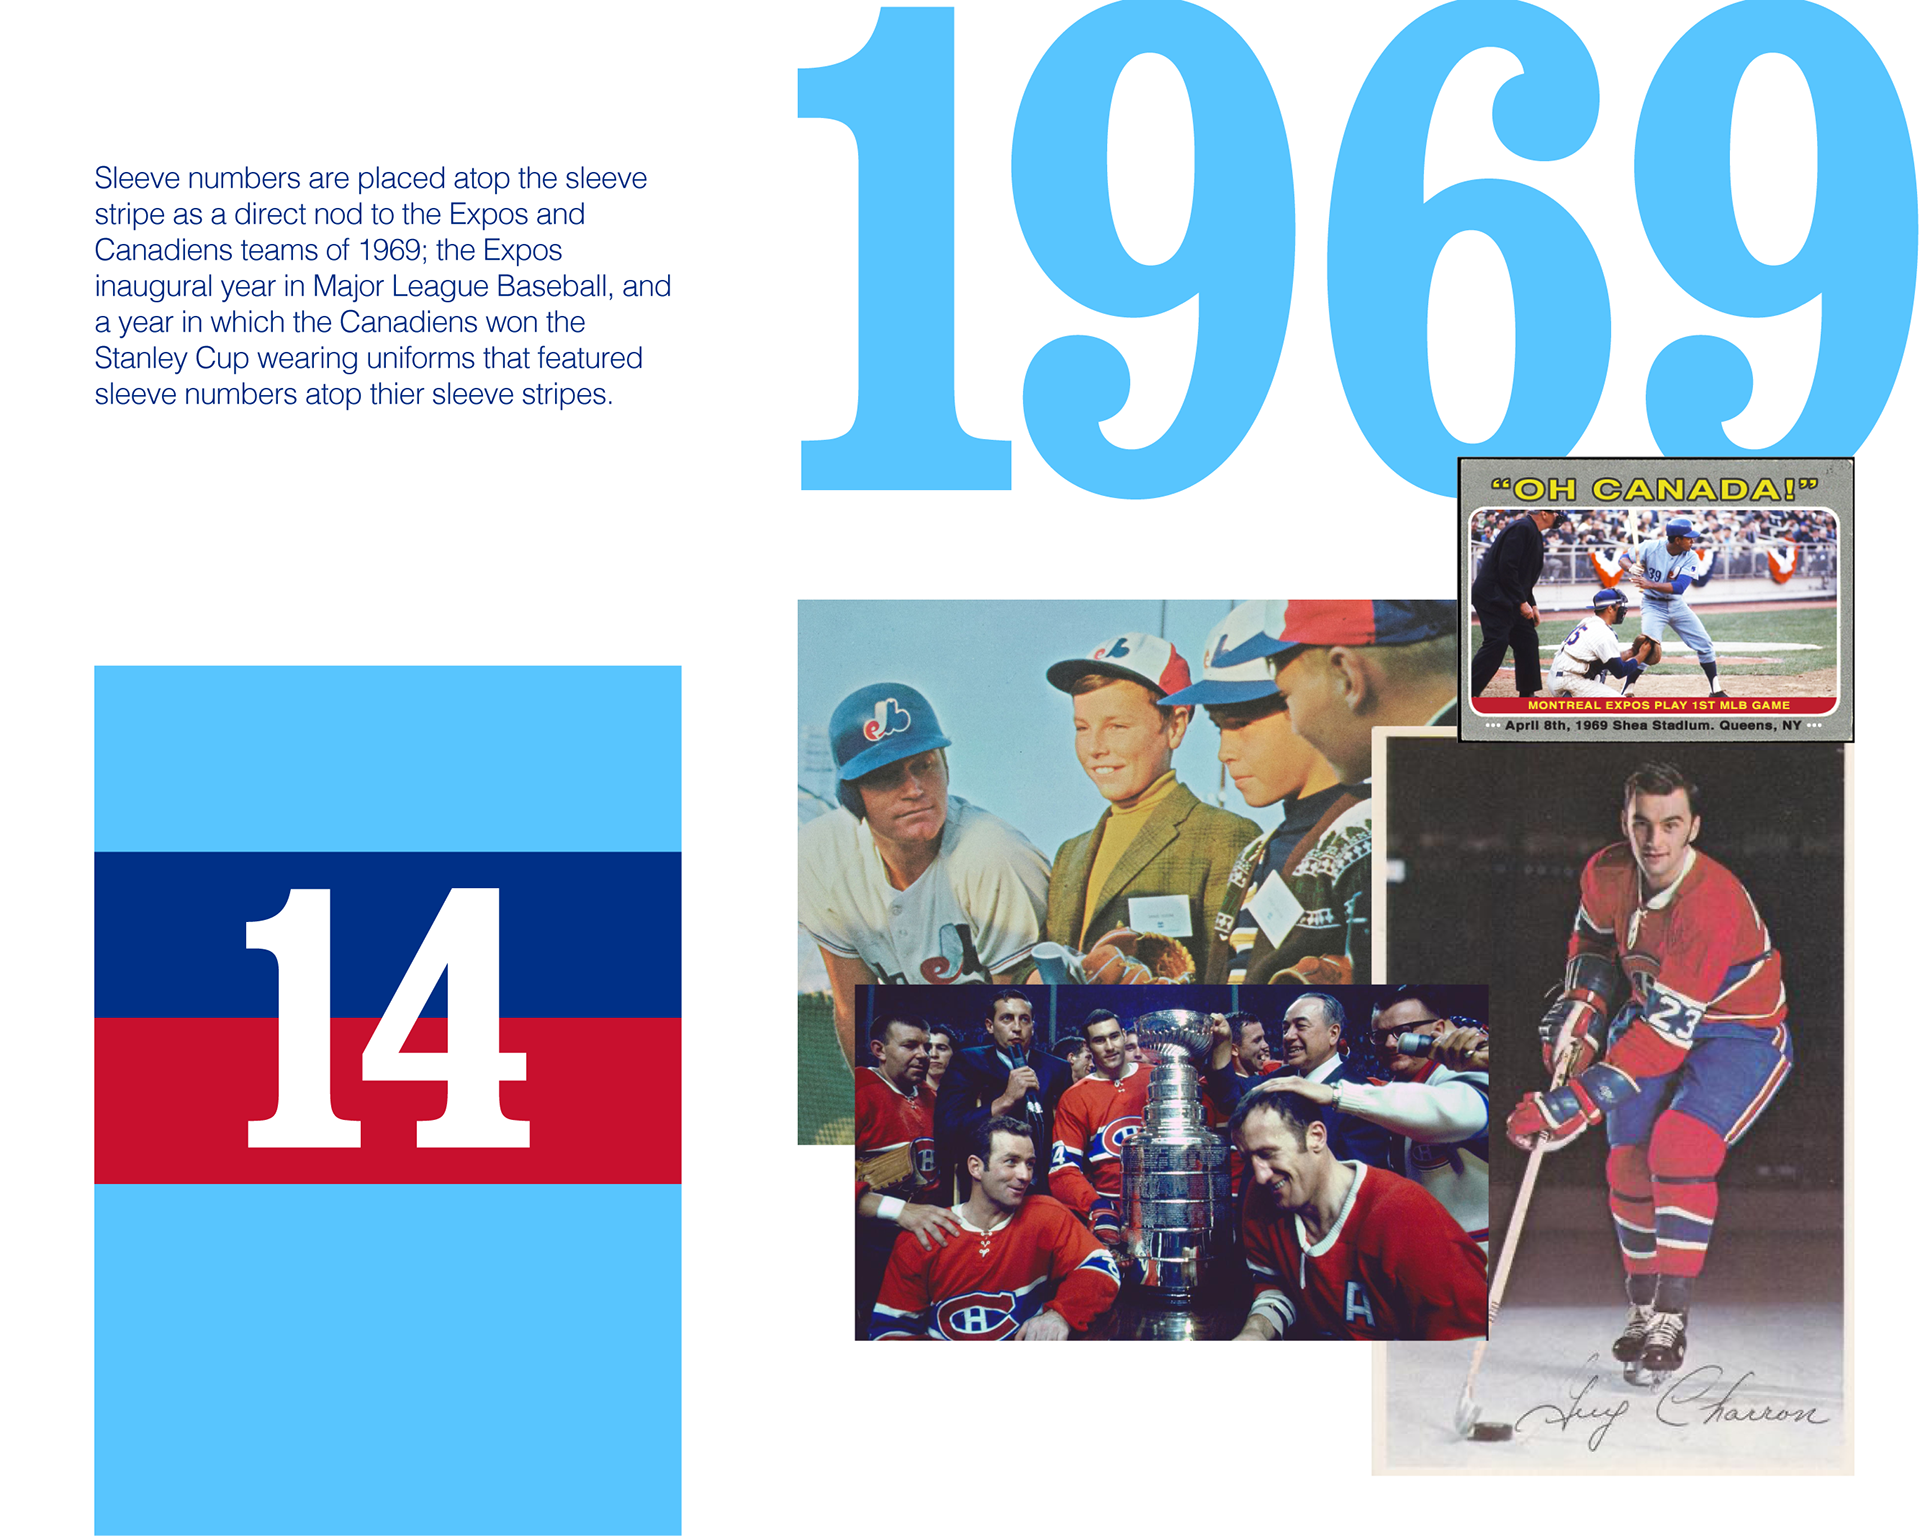 Montreal Canadiens - Expos Tribute Sweater - Concepts - Chris Creamer's  Sports Logos Community - CCSLC - SportsLogos.Net Forums